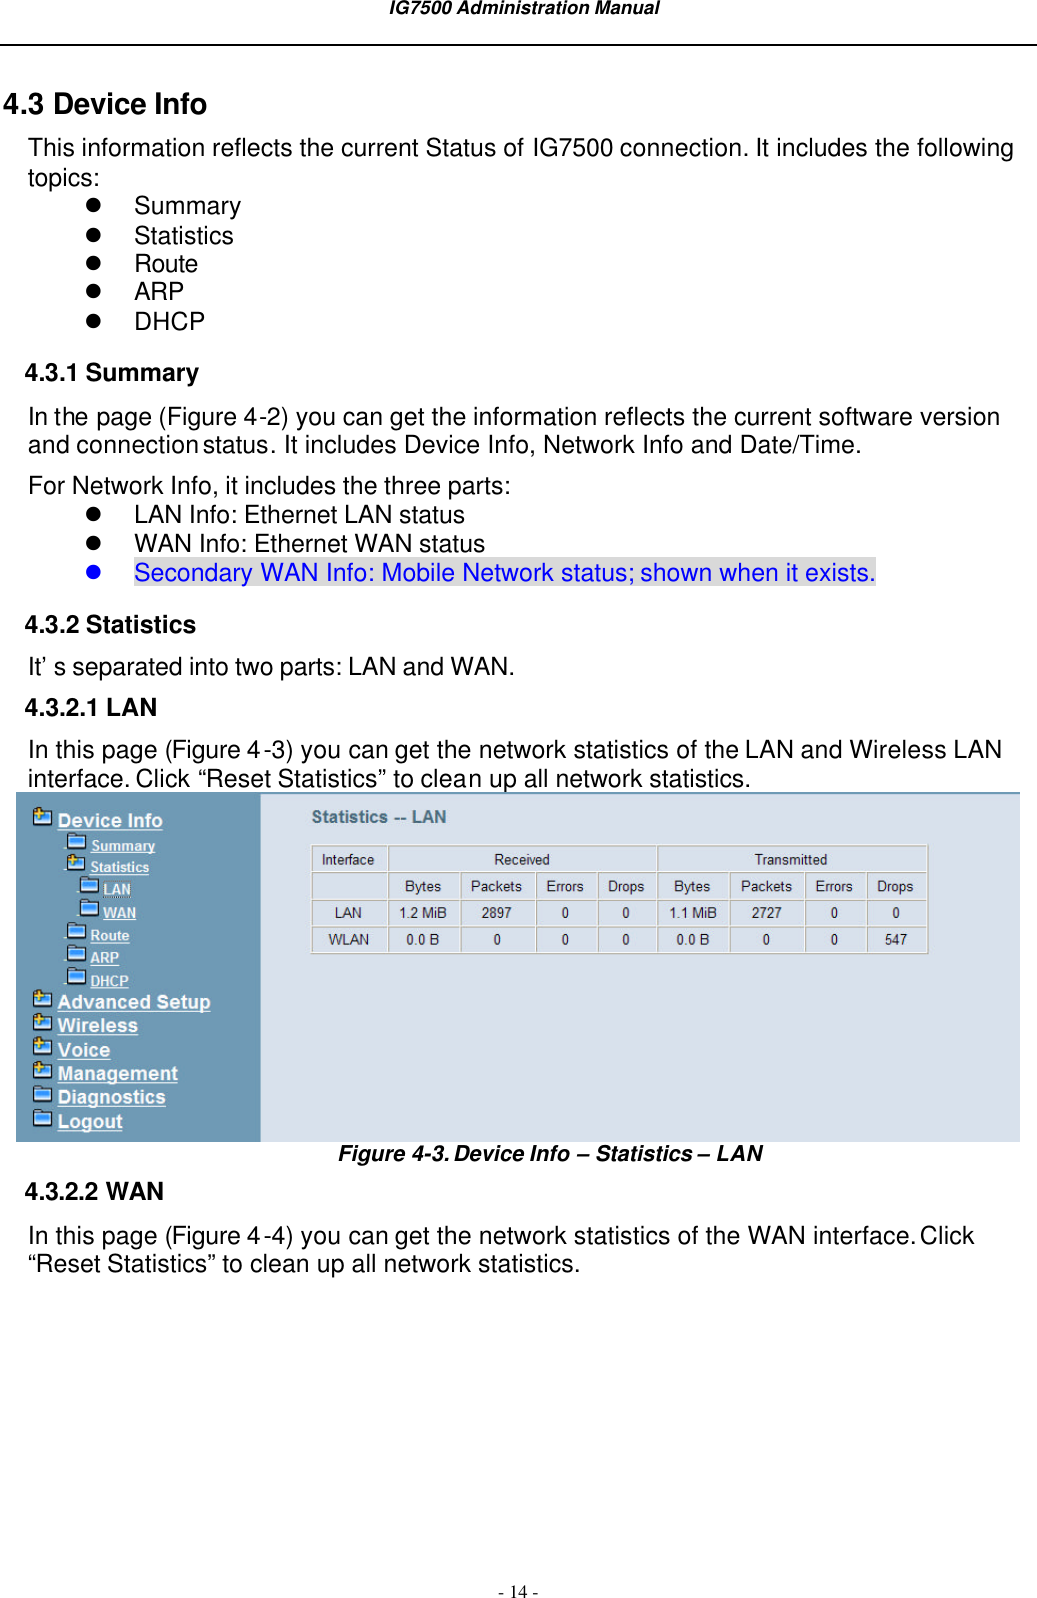  IG7500 Administration Manual  - 14 - 4.3 Device Info This information reflects the current Status of IG7500 connection. It includes the following topics: l Summary l Statistics l Route l ARP l DHCP 4.3.1 Summary In the page (Figure 4-2) you can get the information reflects the current software version and connection status. It includes Device Info, Network Info and Date/Time. For Network Info, it includes the three parts: l LAN Info: Ethernet LAN status l WAN Info: Ethernet WAN status l Secondary WAN Info: Mobile Network status; shown when it exists. 4.3.2 Statistics It’s separated into two parts: LAN and WAN. 4.3.2.1 LAN In this page (Figure 4-3) you can get the network statistics of the LAN and Wireless LAN interface. Click “Reset Statistics” to clean up all network statistics.  Figure 4-3. Device Info – Statistics – LAN 4.3.2.2 WAN In this page (Figure 4-4) you can get the network statistics of the WAN interface. Click “Reset Statistics” to clean up all network statistics. 